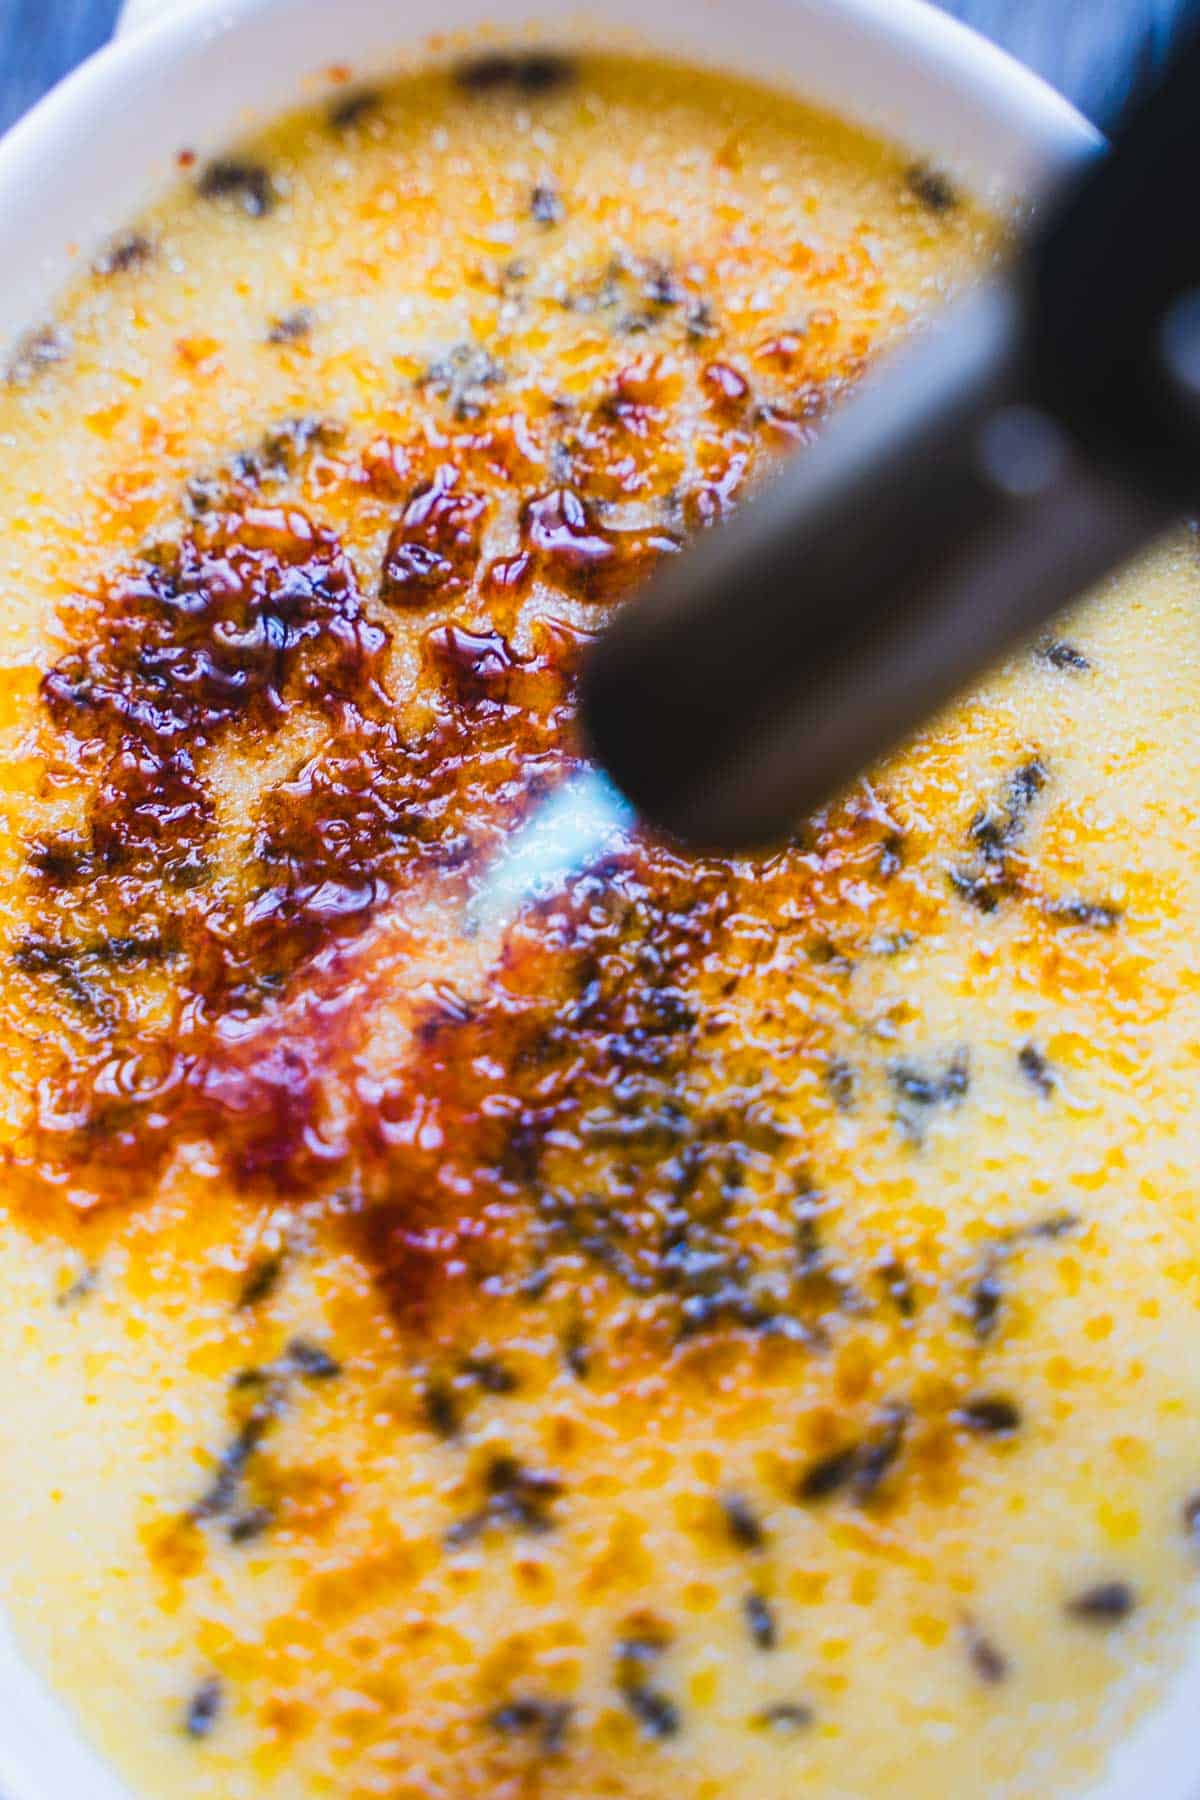 Caramelizing the top of the creme brulee using a kitchen torch.